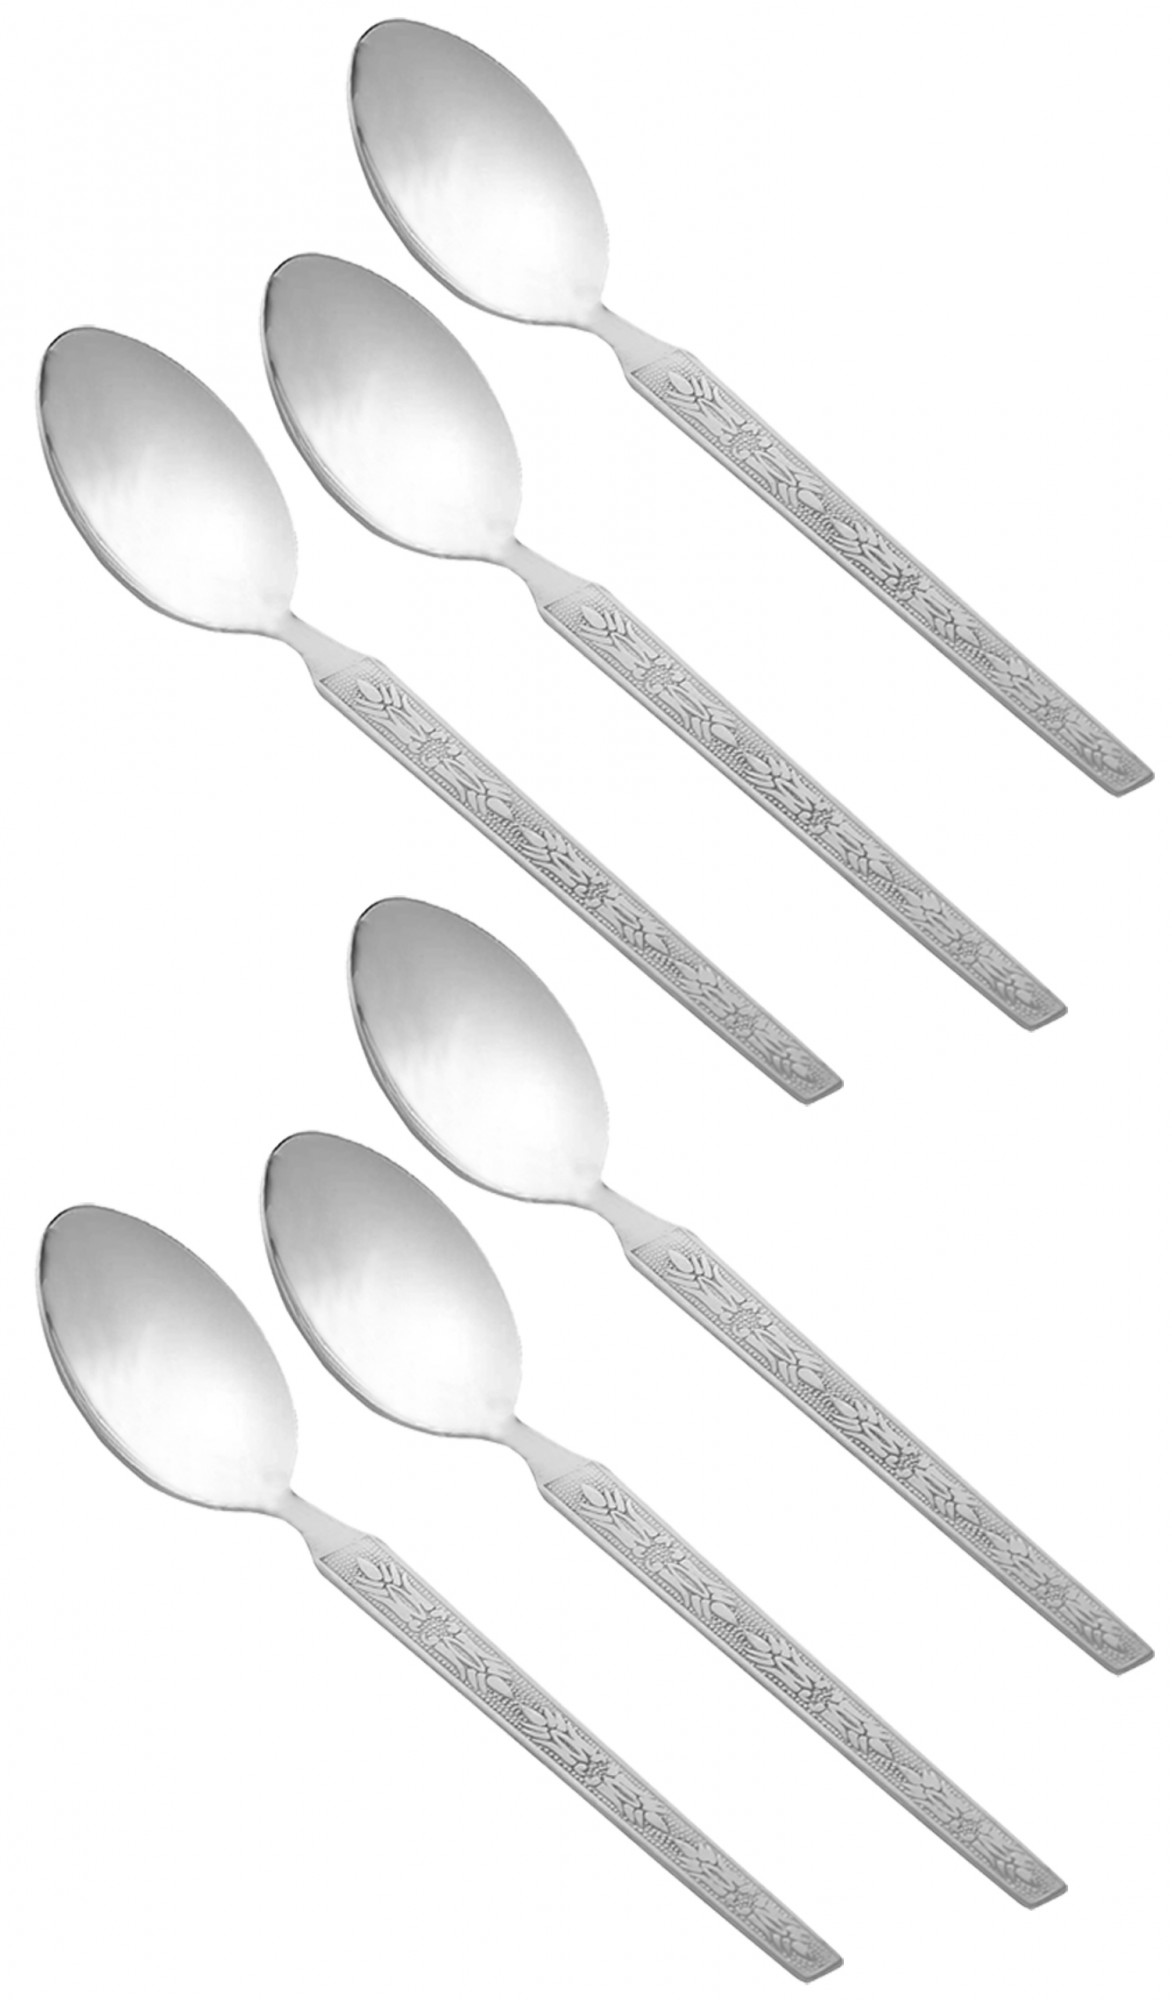 Kuber Industries Stainless Steel Dinner Spoons, Extra-Fine Dessert Spoons for Home, Kitchen or Restaurant (Silver)